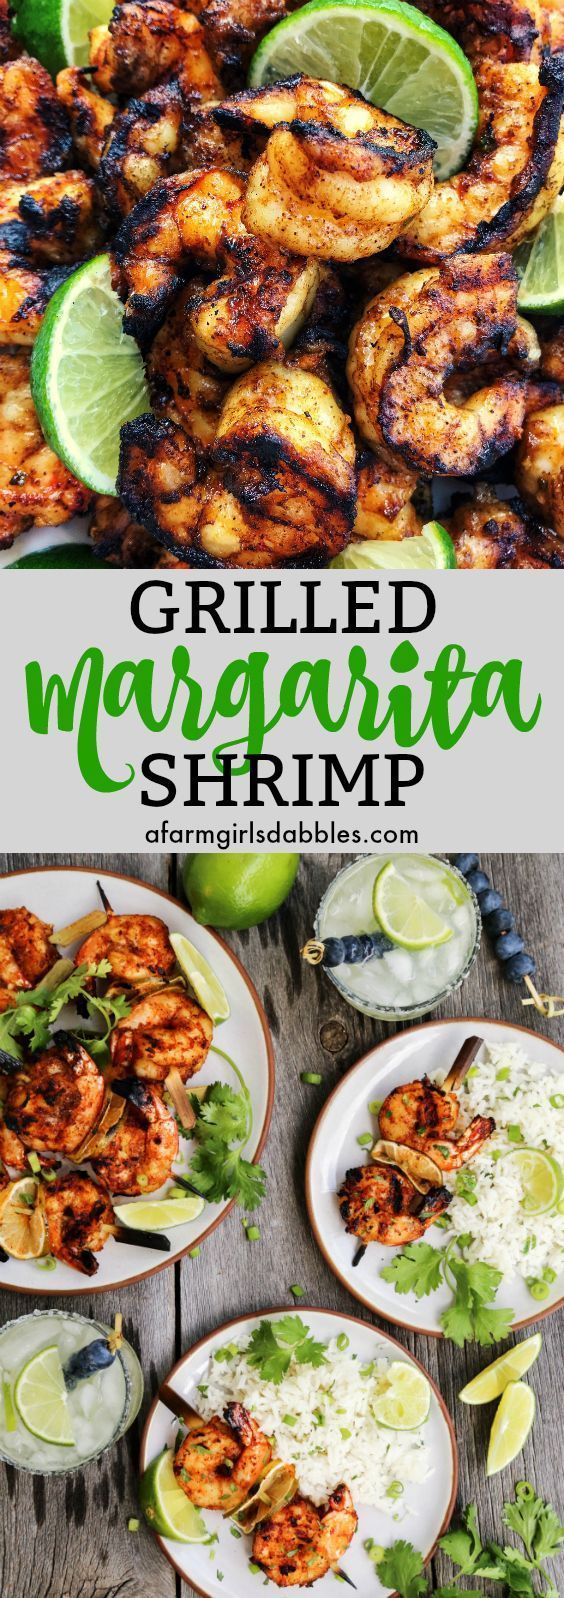 Grilled Margarita Shrimp from afarmgirlsdabbles.com - Grilled Margarita Shrimp are loaded with flavor and charred to perfection